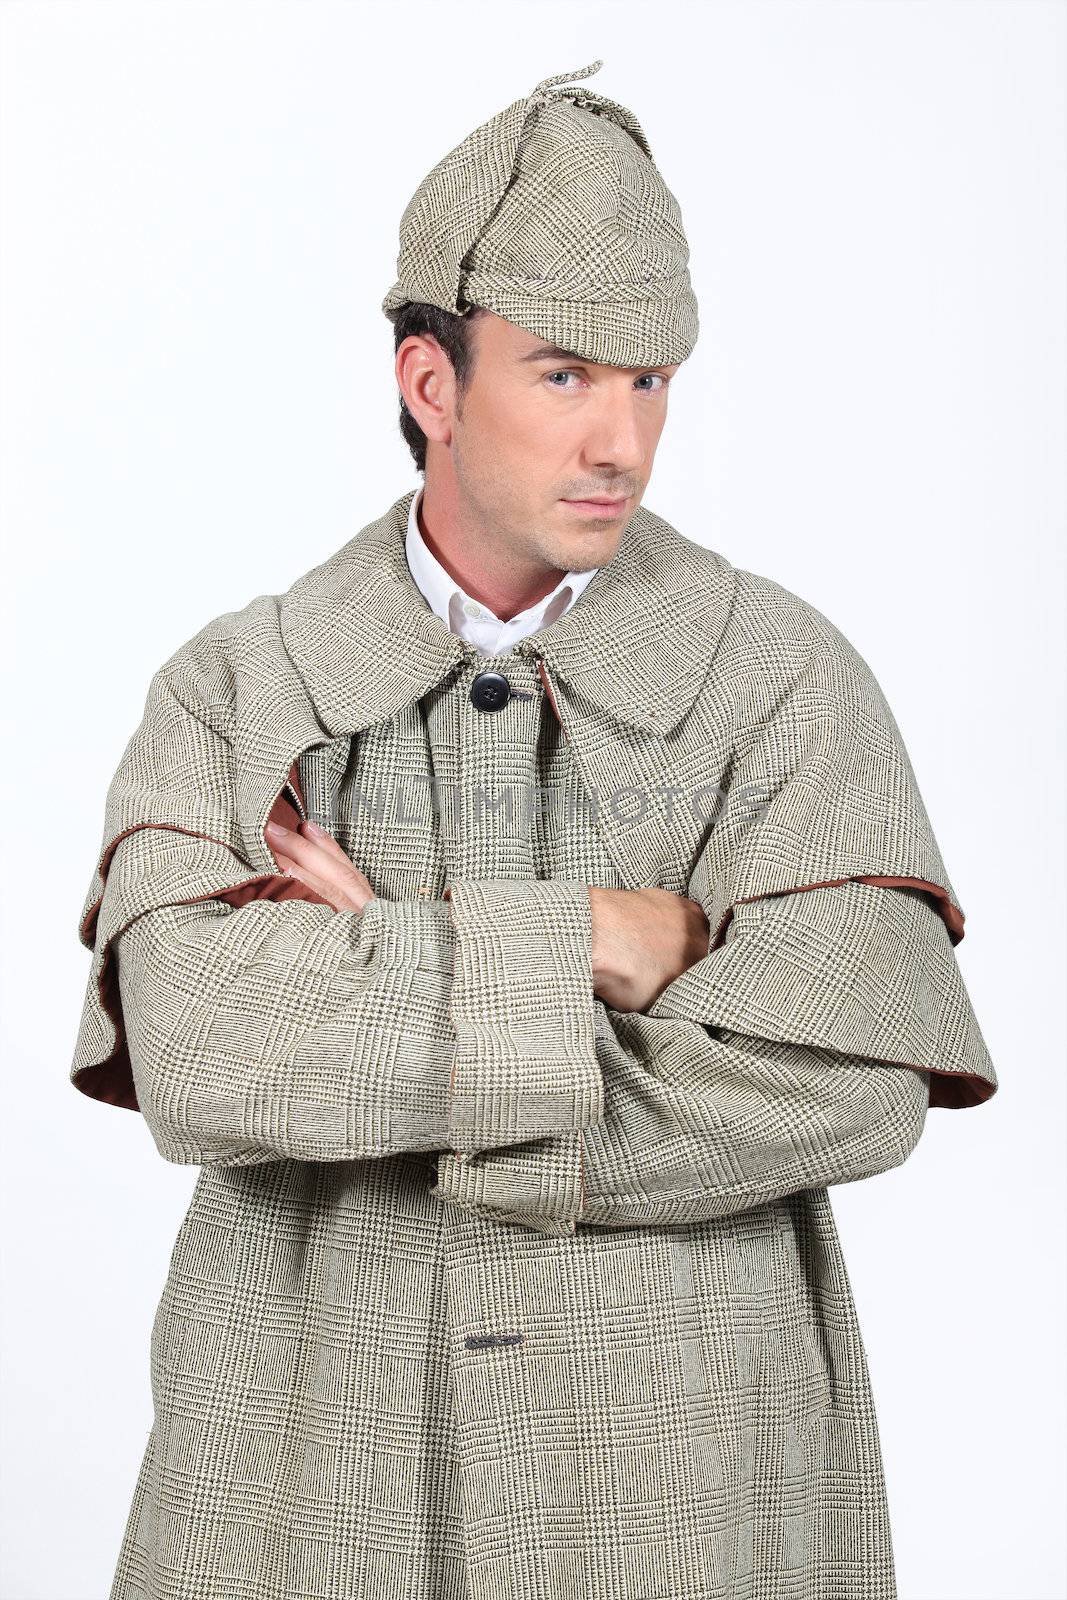 Man in Sherlock Holmes outfit by phovoir